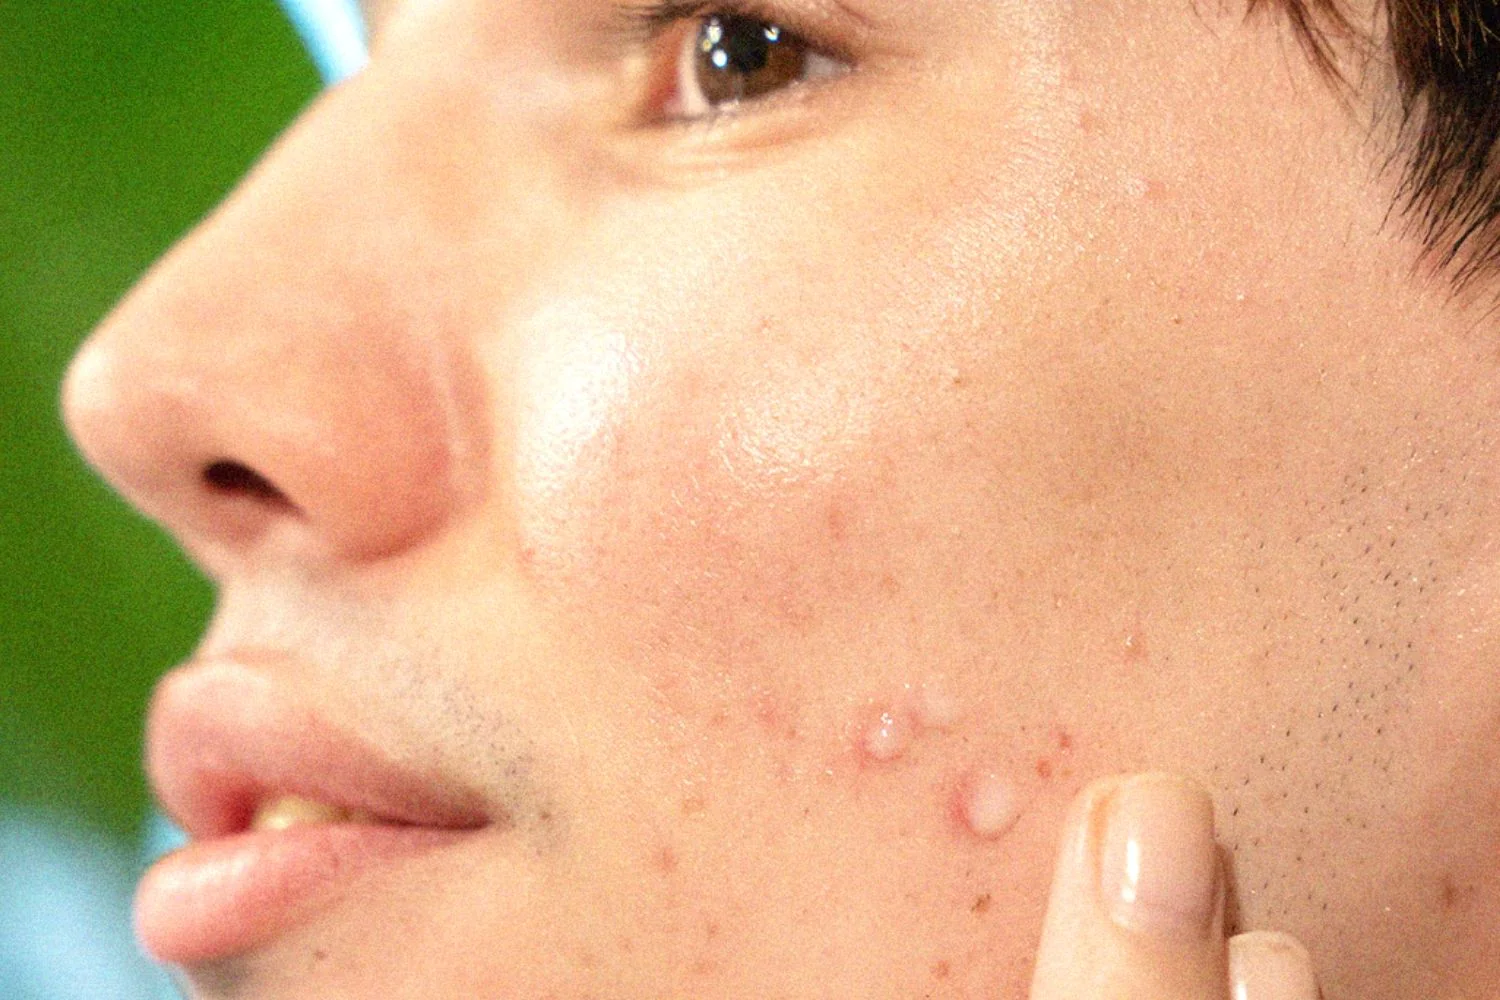 All You Need To Know About Pimple Scars